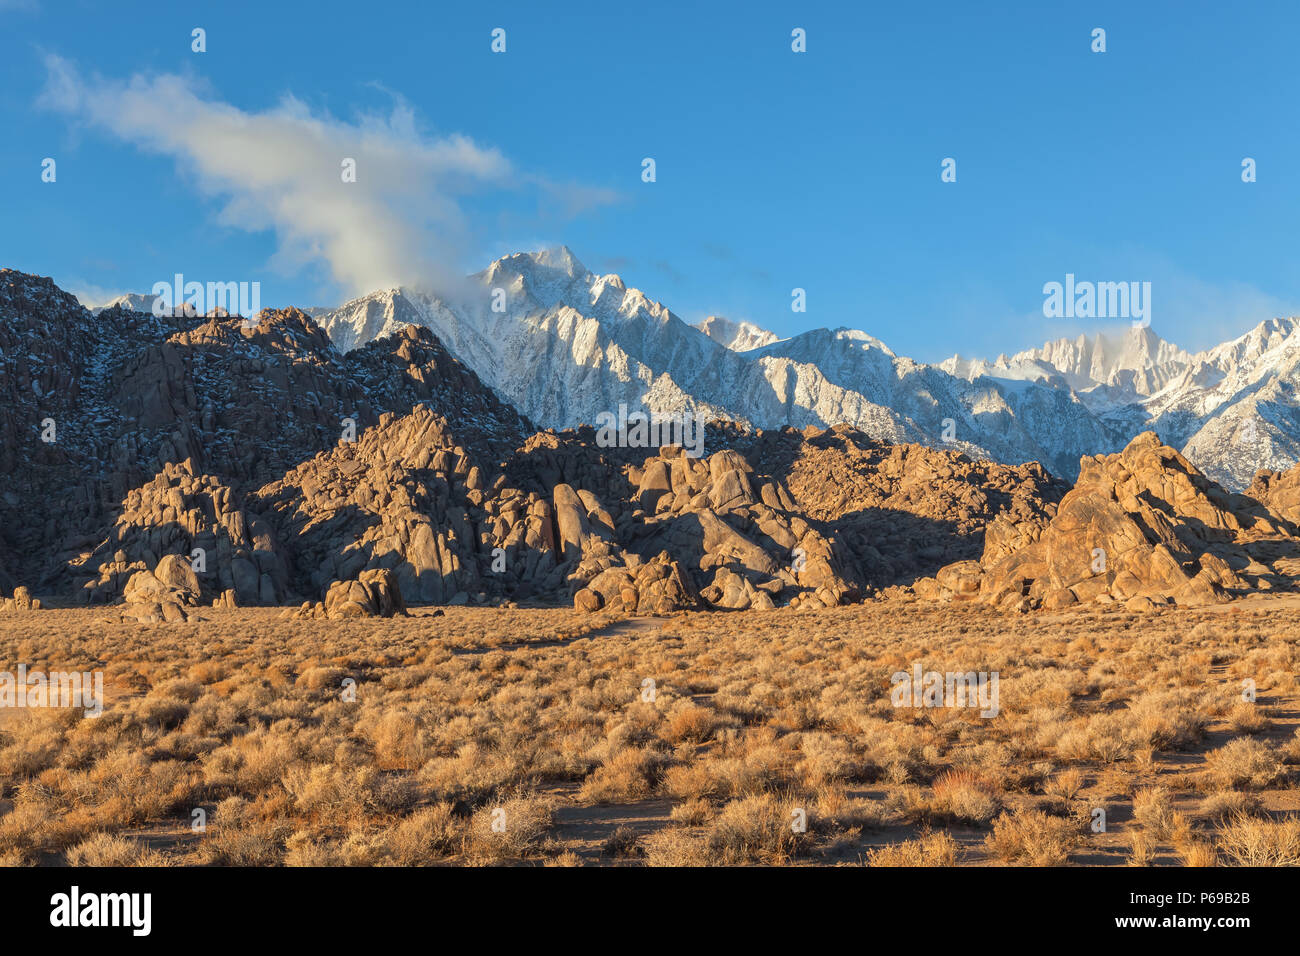 Morning at Alabama Hill, Lone Pine, California, USA, with the Lone Pine Peak, Mt. Whitney covered with snow in background. Stock Photo